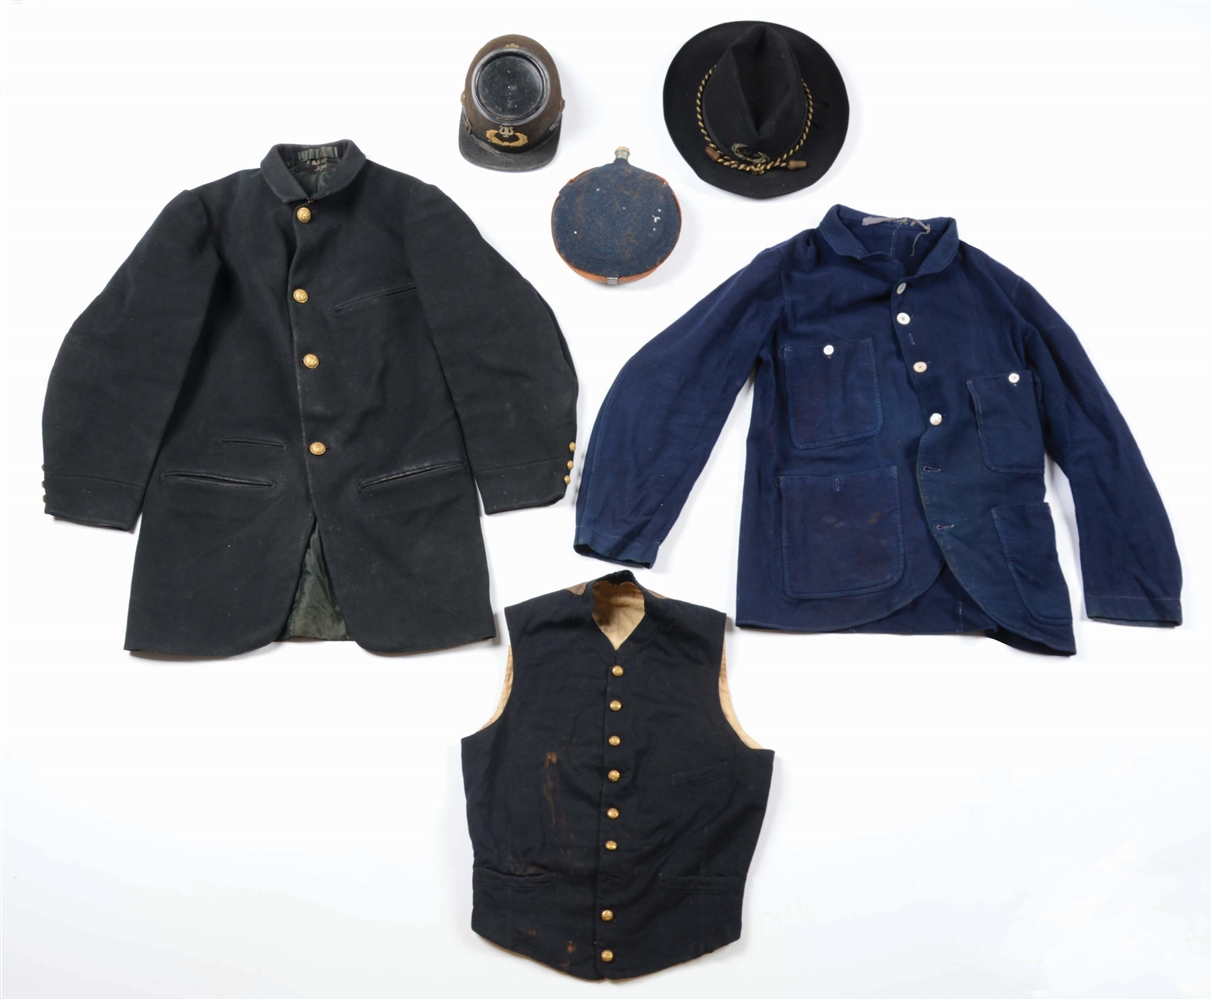 LOT OF 6: US 19TH CENTURY UNIFORM GROUP INCLUDING TWO HATS, CANTEEN, CAMP SHIRT, VEST, COAT.